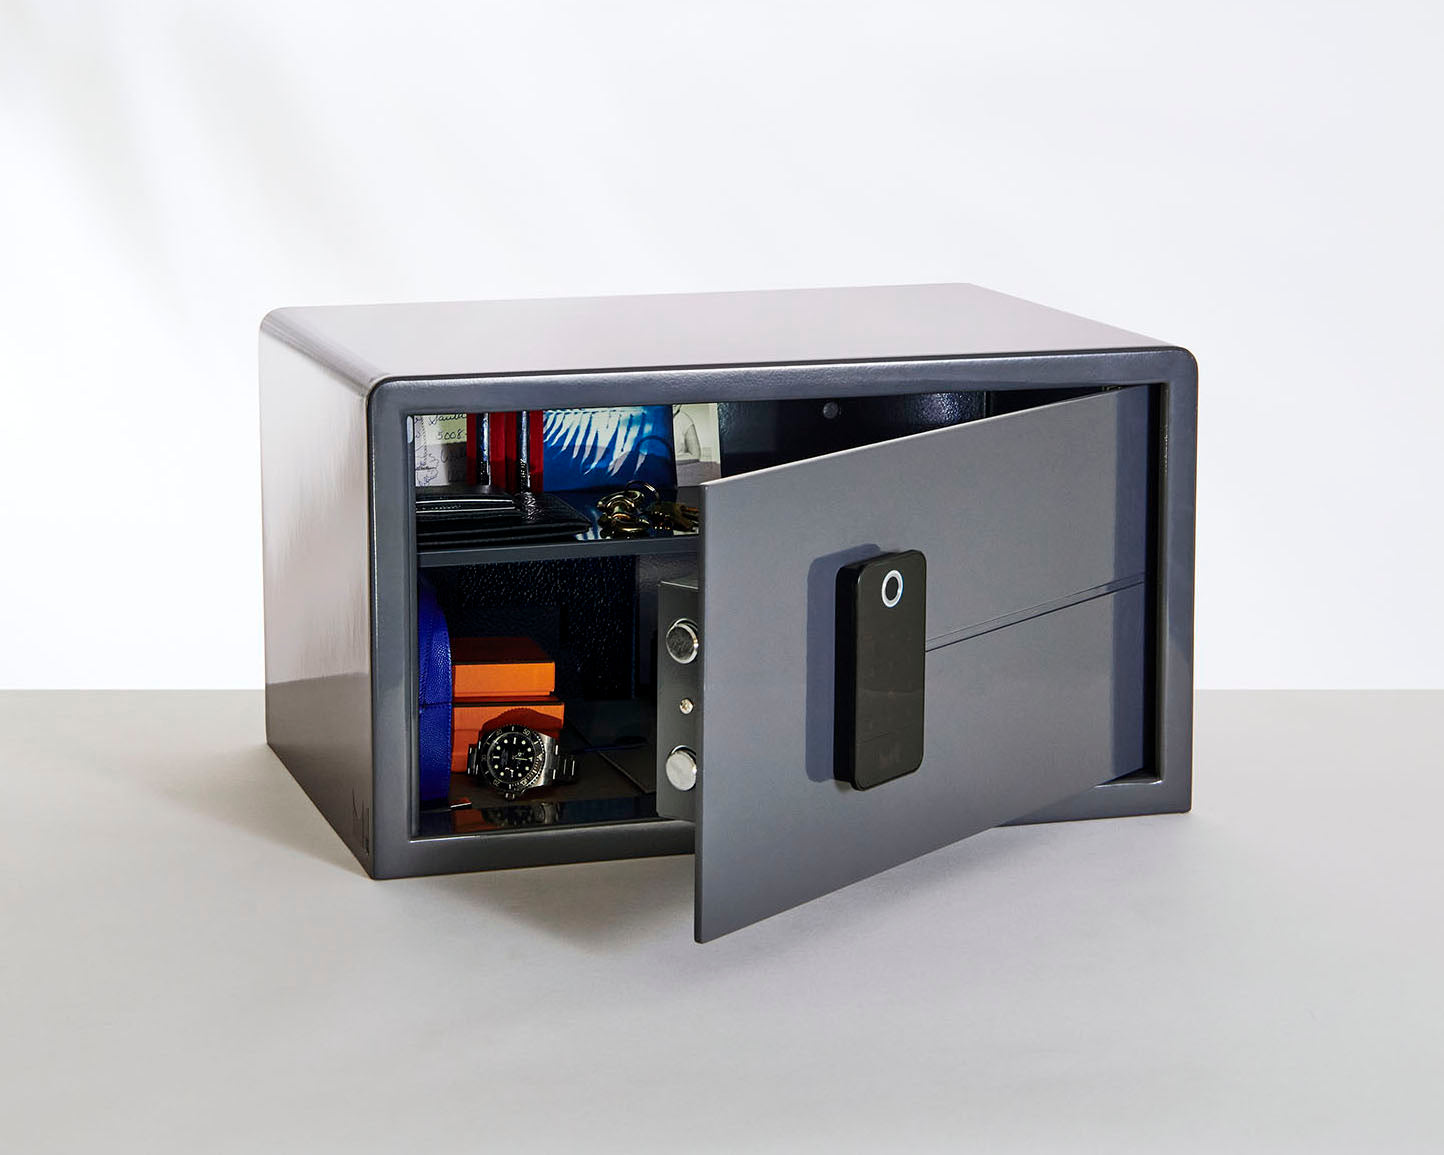 An opened Biocube graphite grey safe showing personal belongings